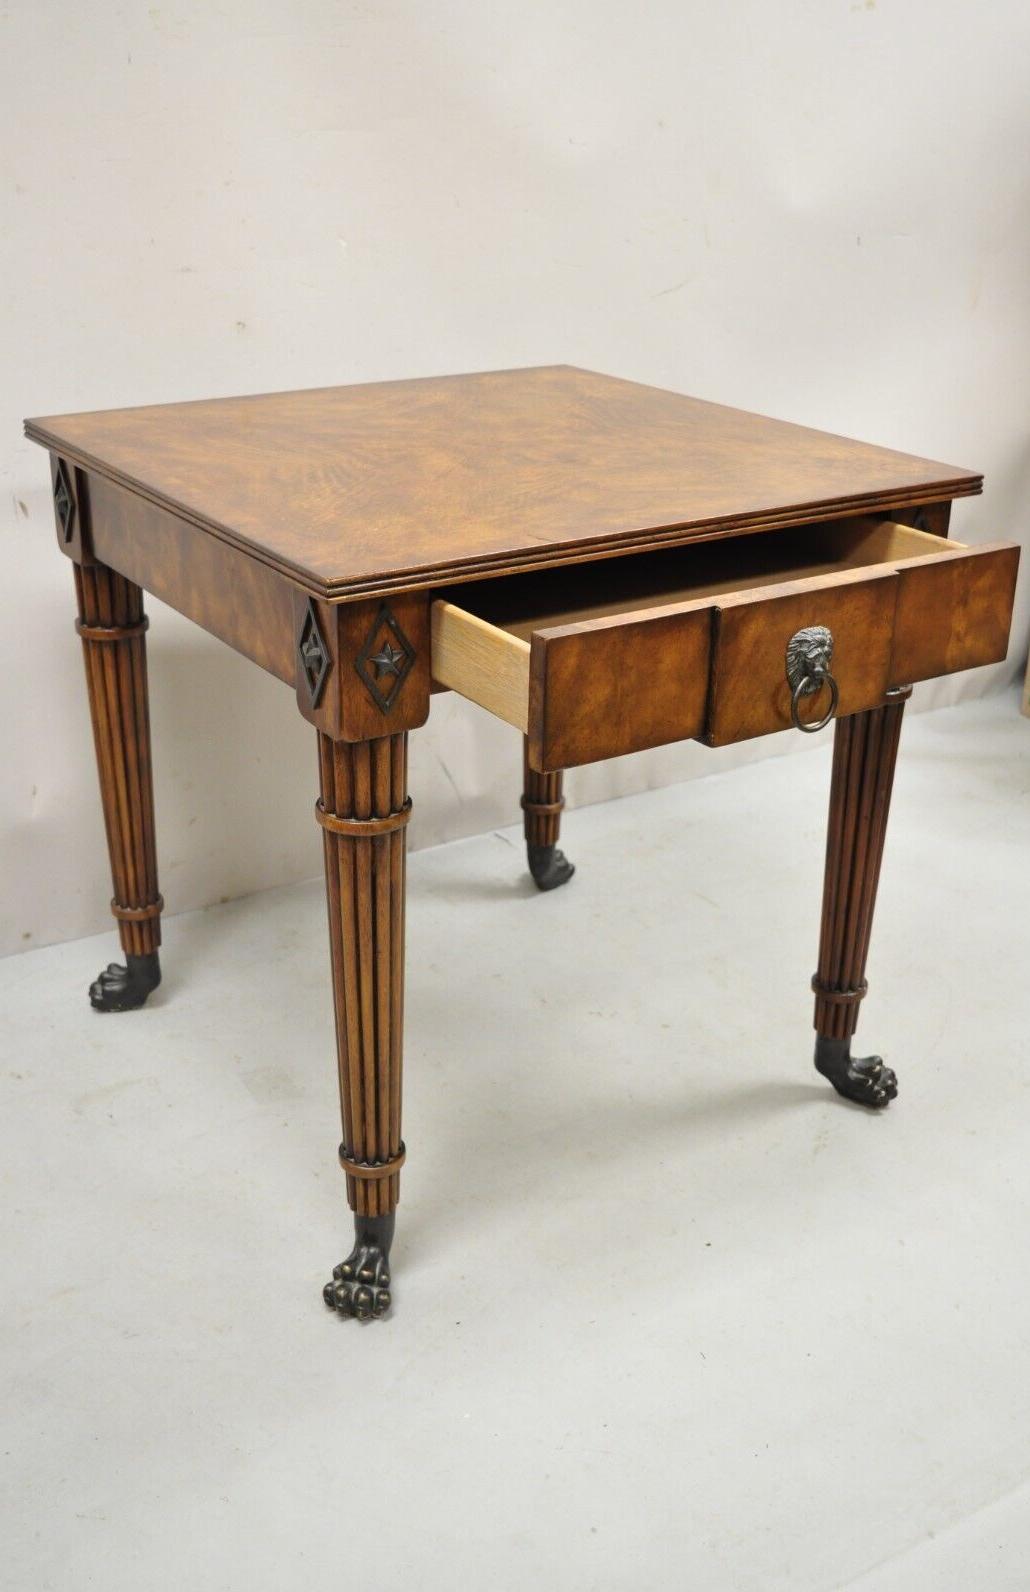 Theodore Alexander Althorp Regency Mahogany One Drawer Side Table A L50046 In Good Condition For Sale In Philadelphia, PA